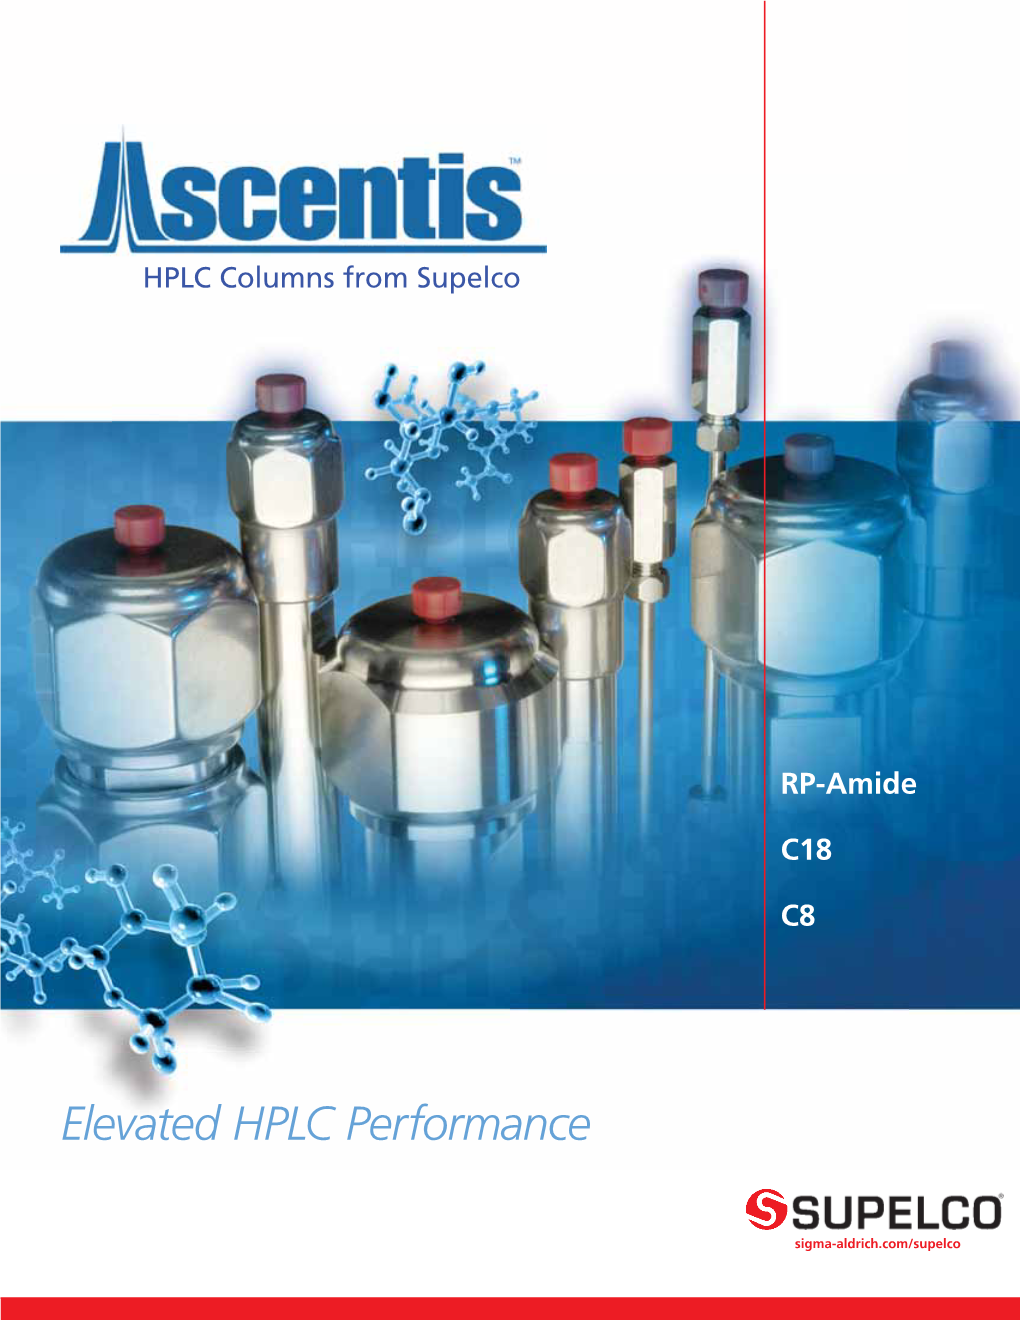 Elevated HPLC Performance